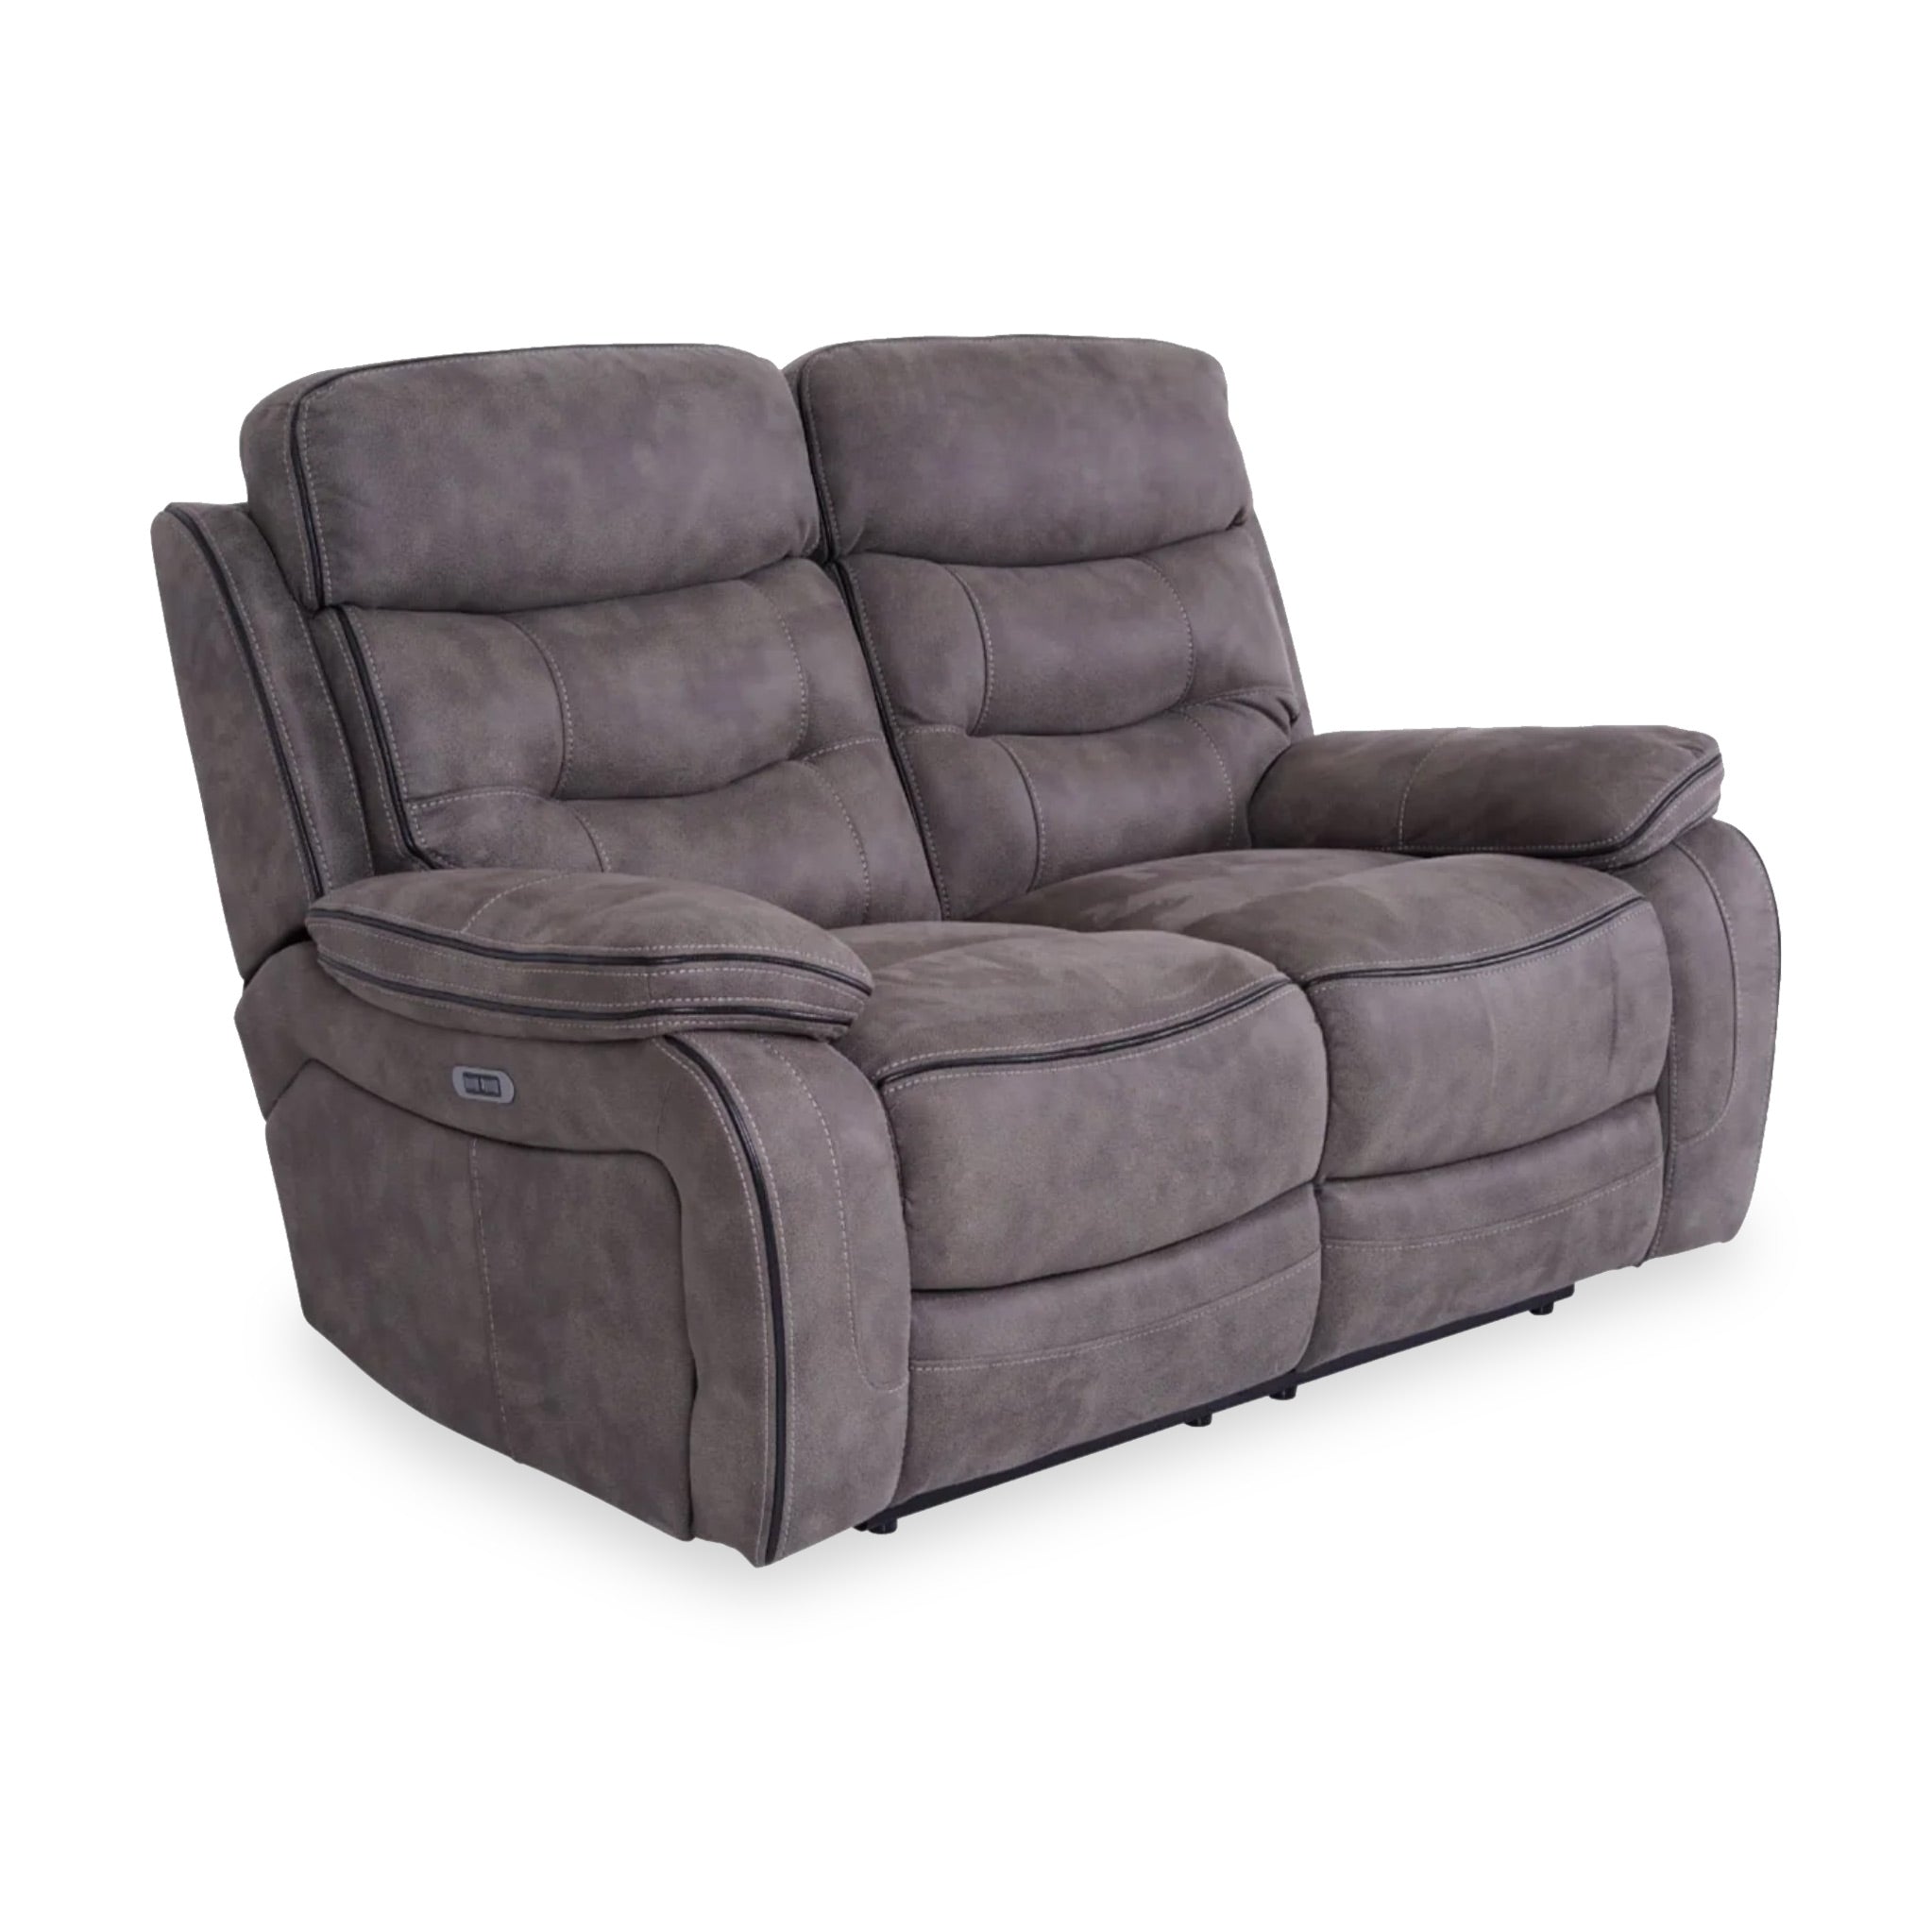 Stanford Performance Fabric Electric Reclining 2 Seater Sofa Roseland